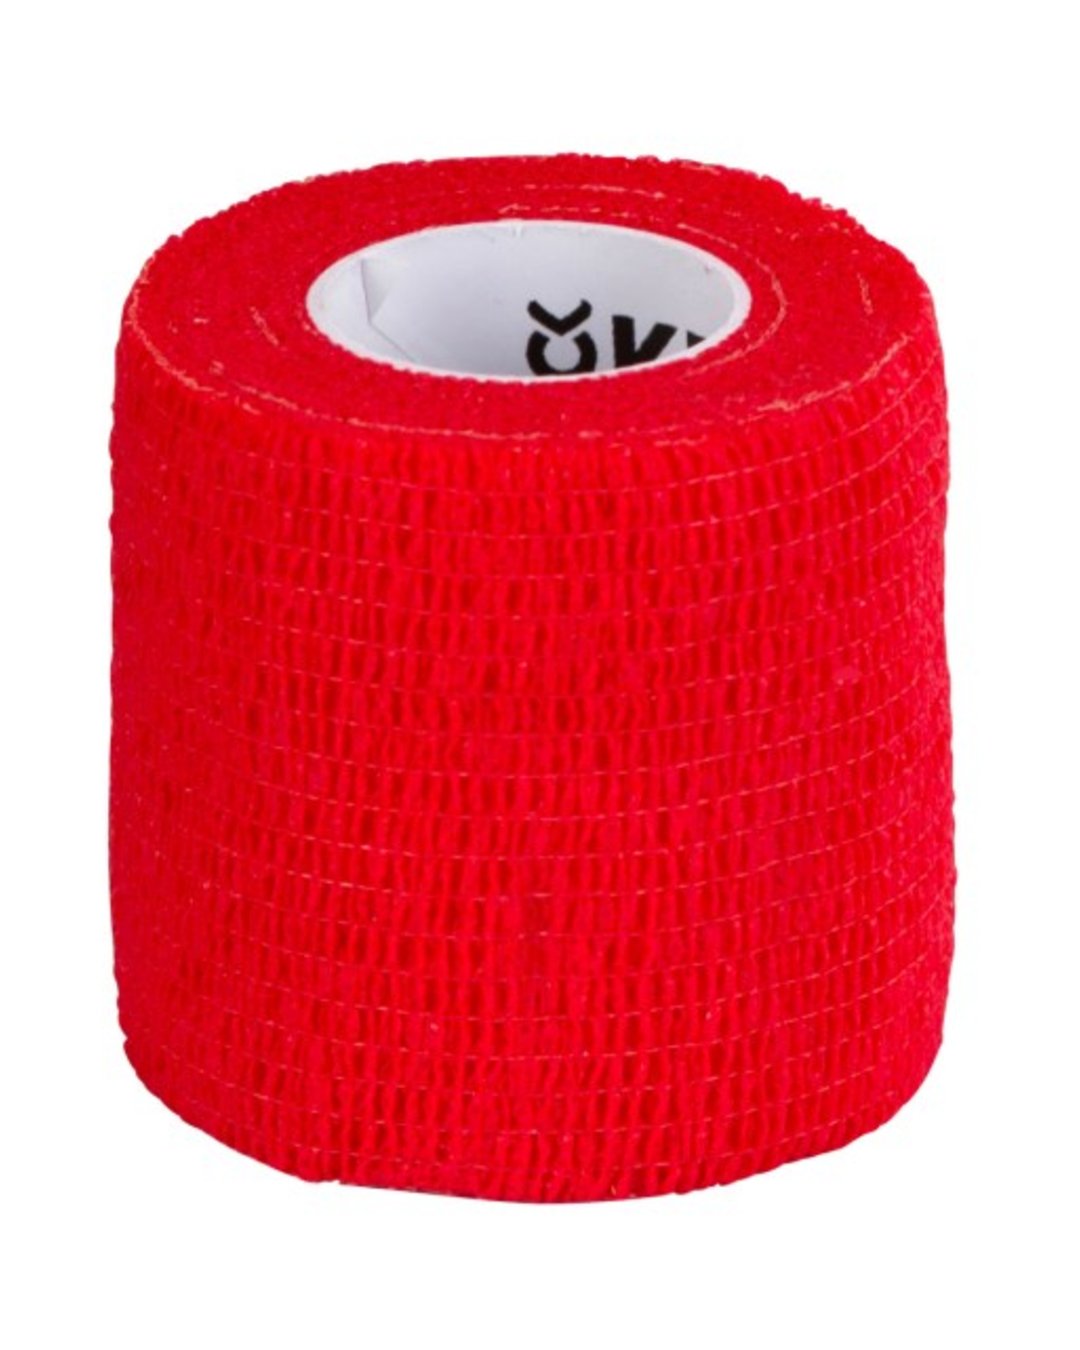 Selbsthaftende Bandage EquiLastic Rot 5 cm